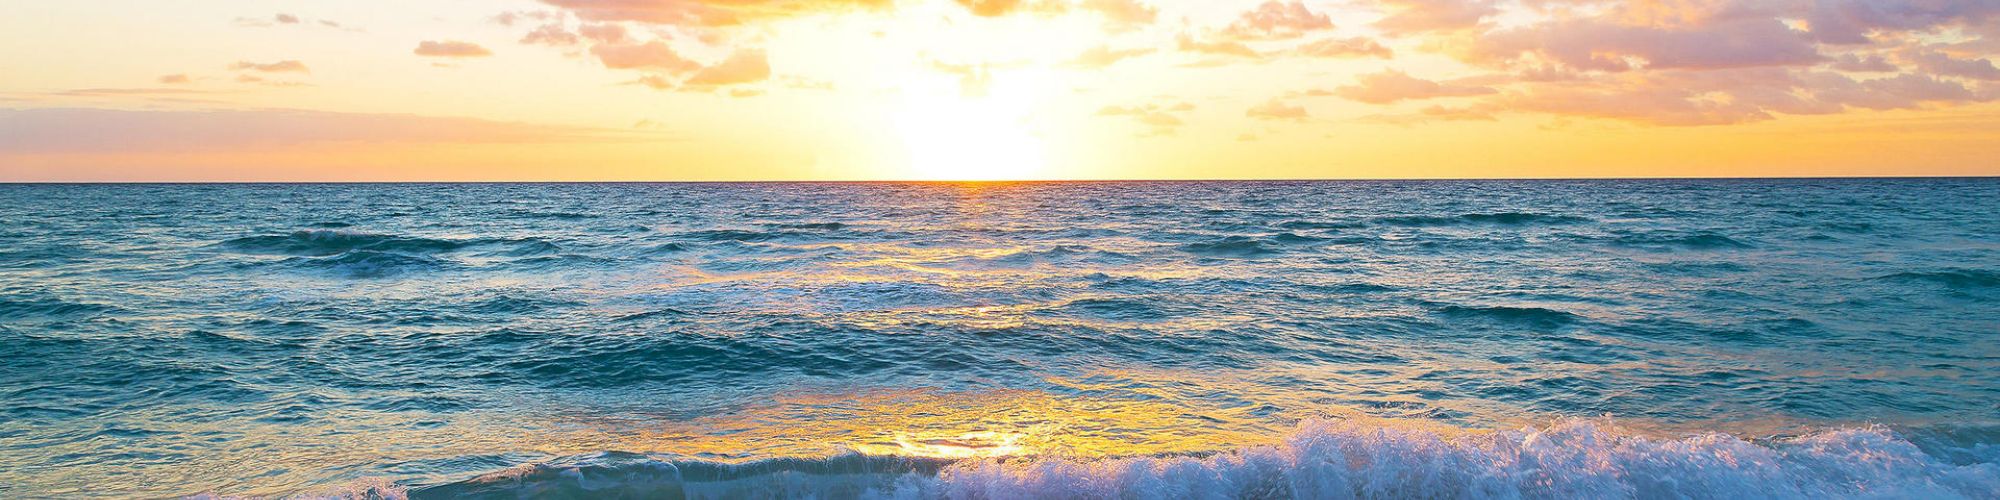 The image shows a beautiful ocean sunset with waves gently crashing onto a sandy beach and clouds scattered across the sky.